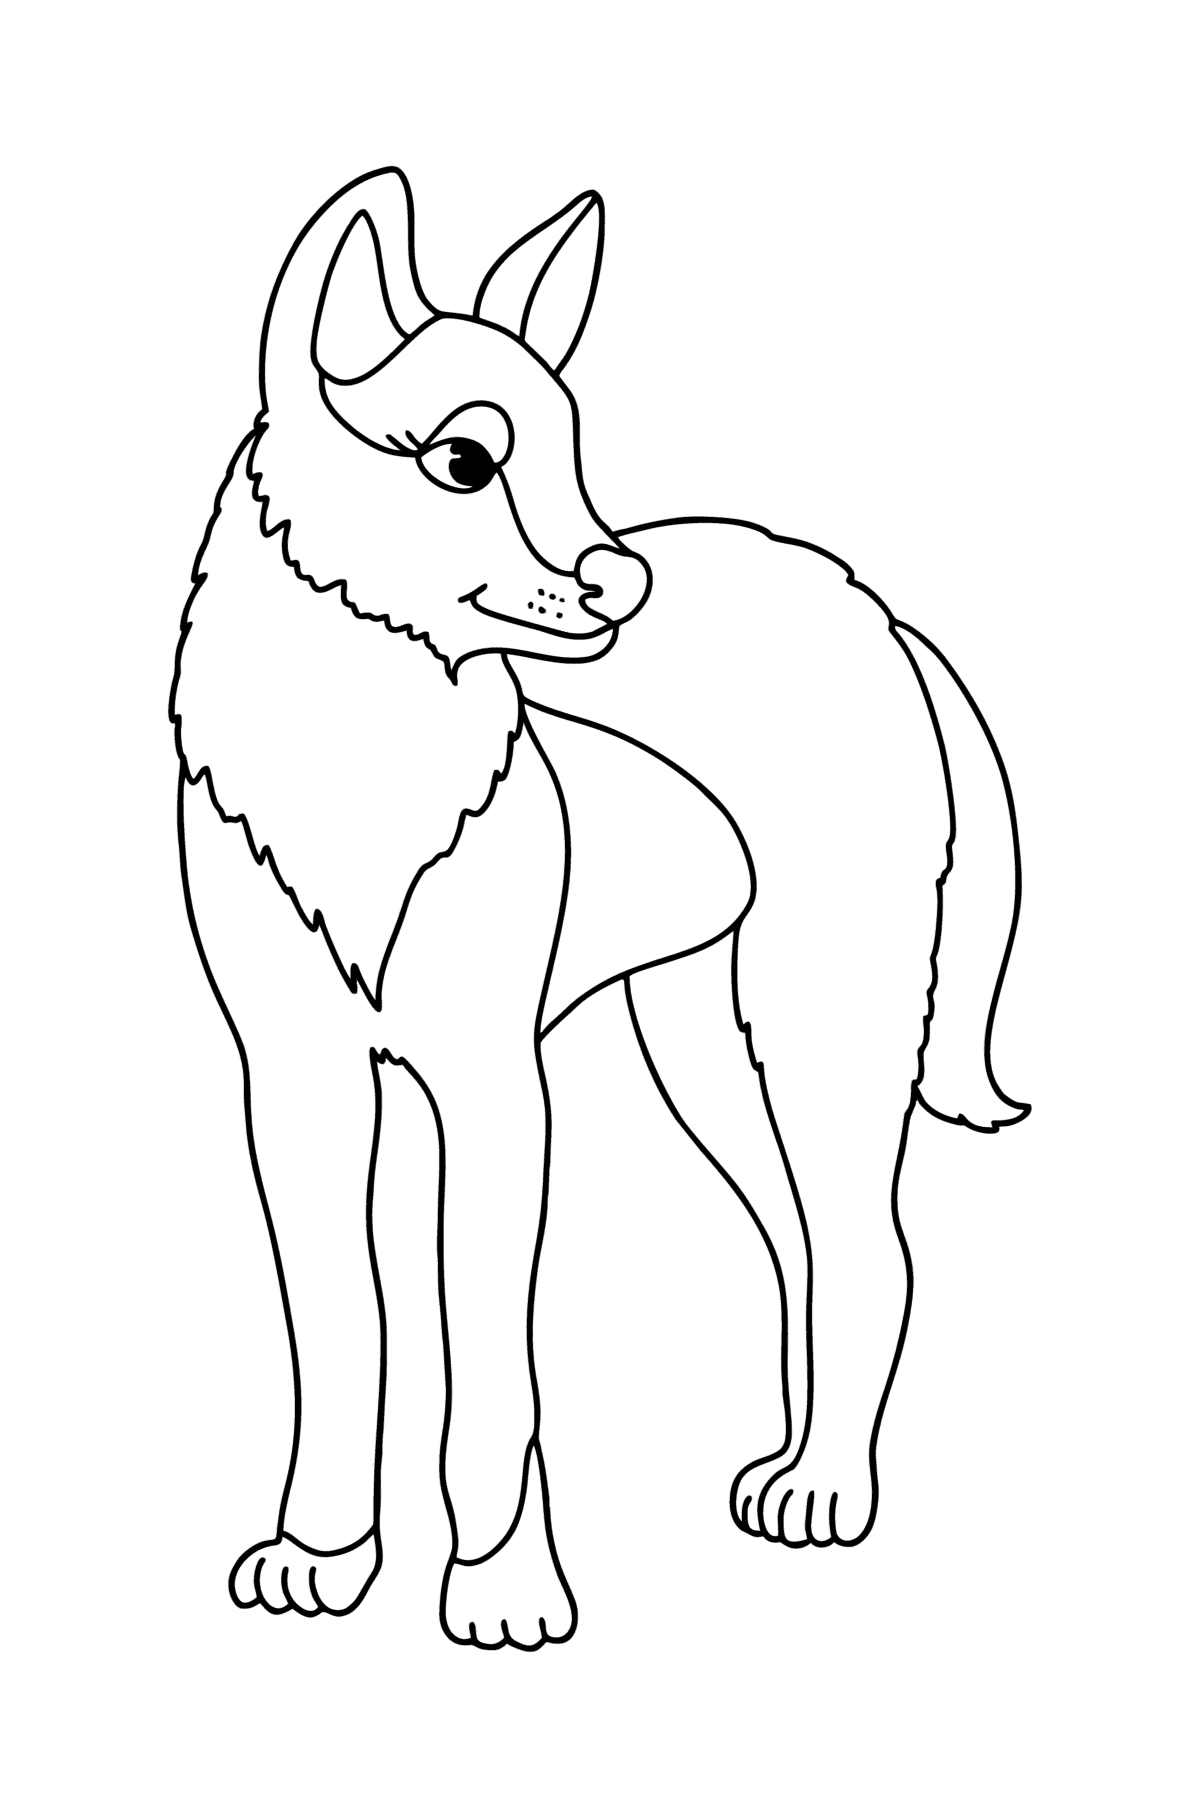 Dingo dog сoloring page - Coloring Pages for Kids